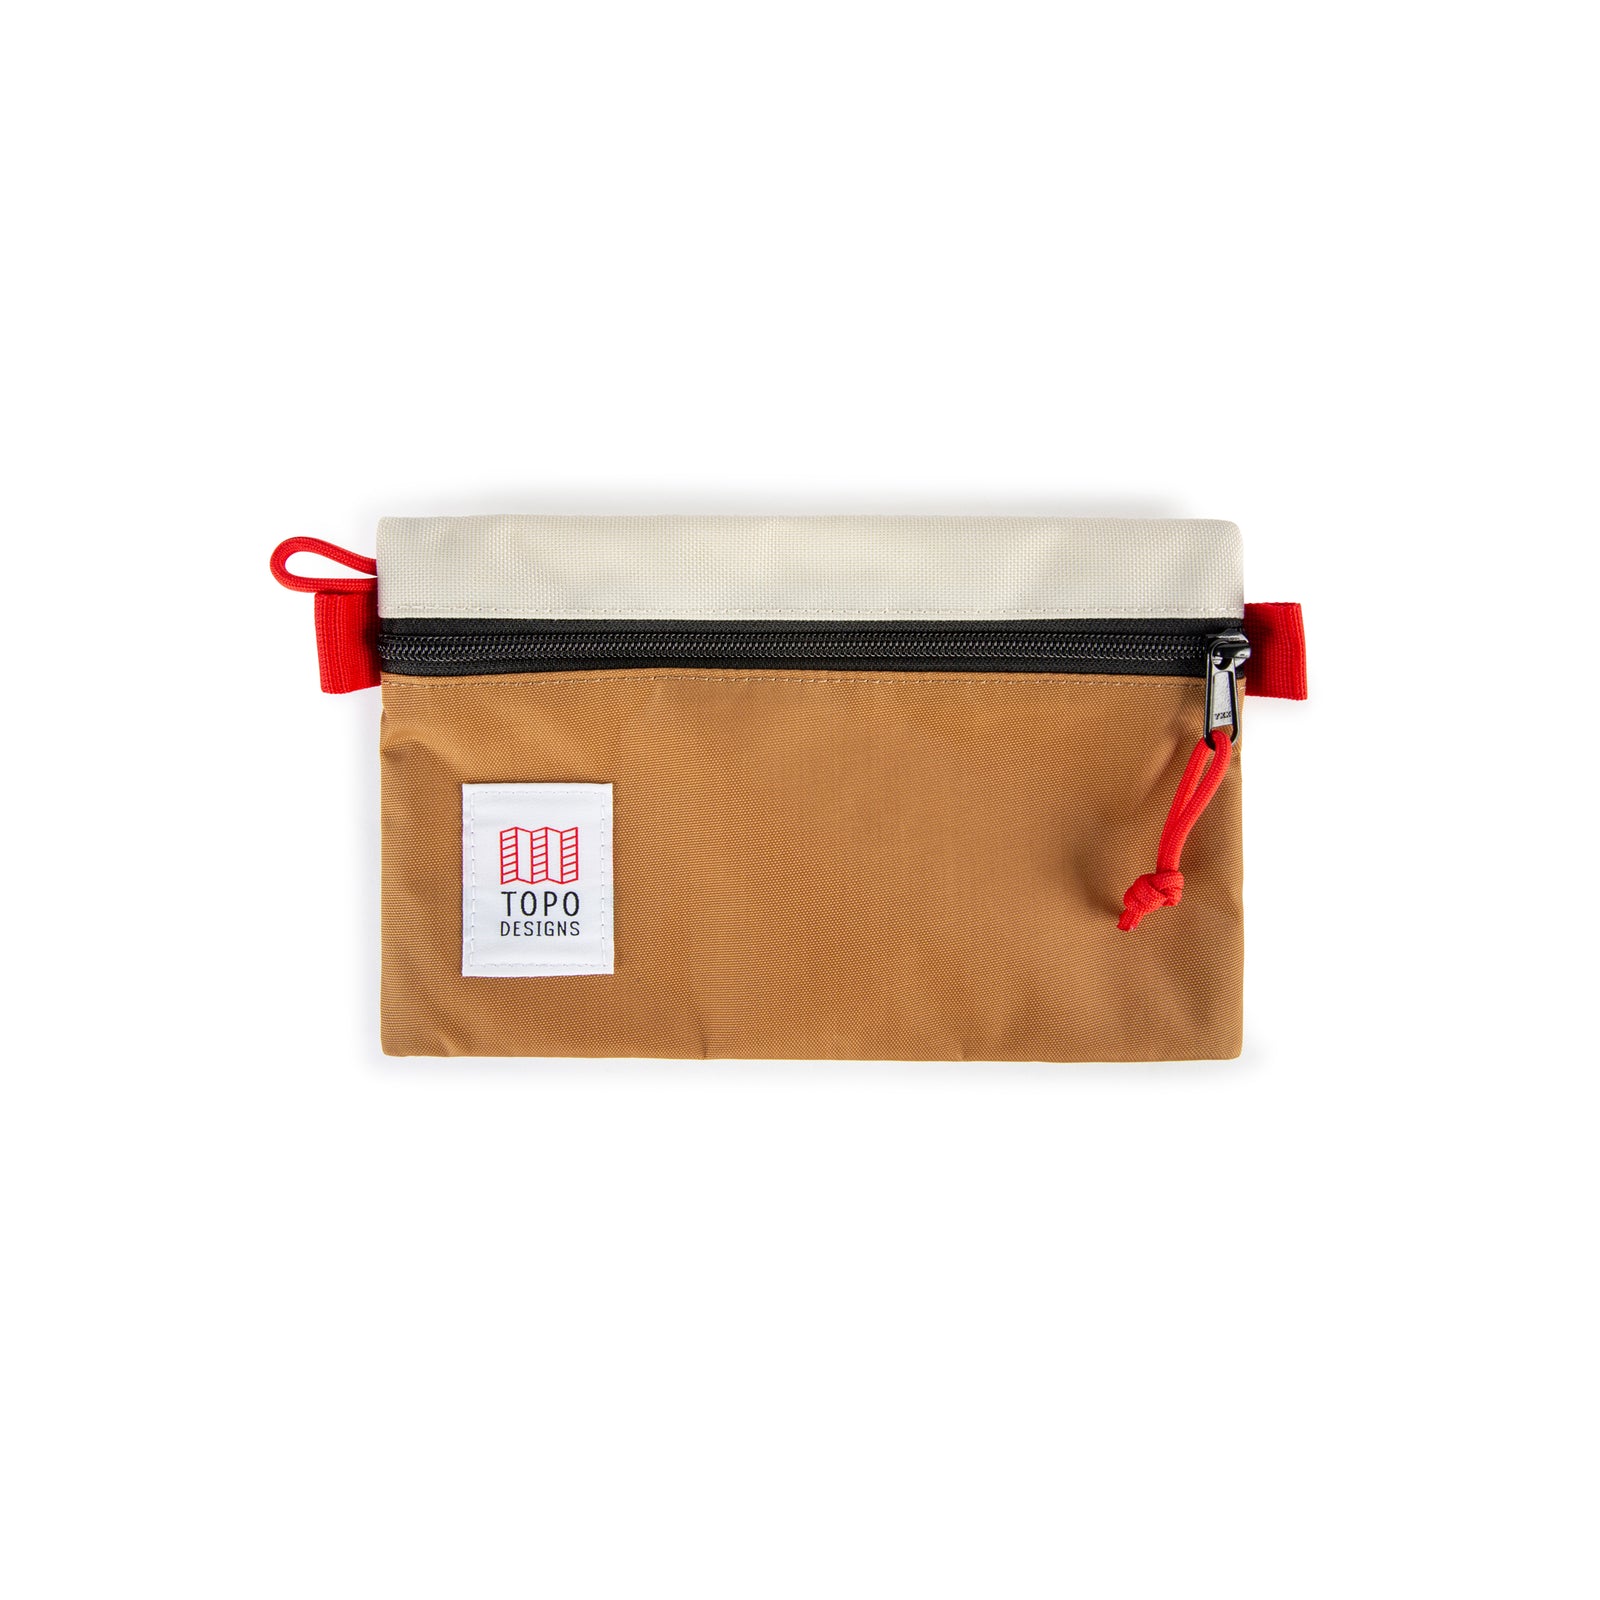 Topo Designs Accessory Bags in "Small" "Bone White / Khaki - Recycled" brown.